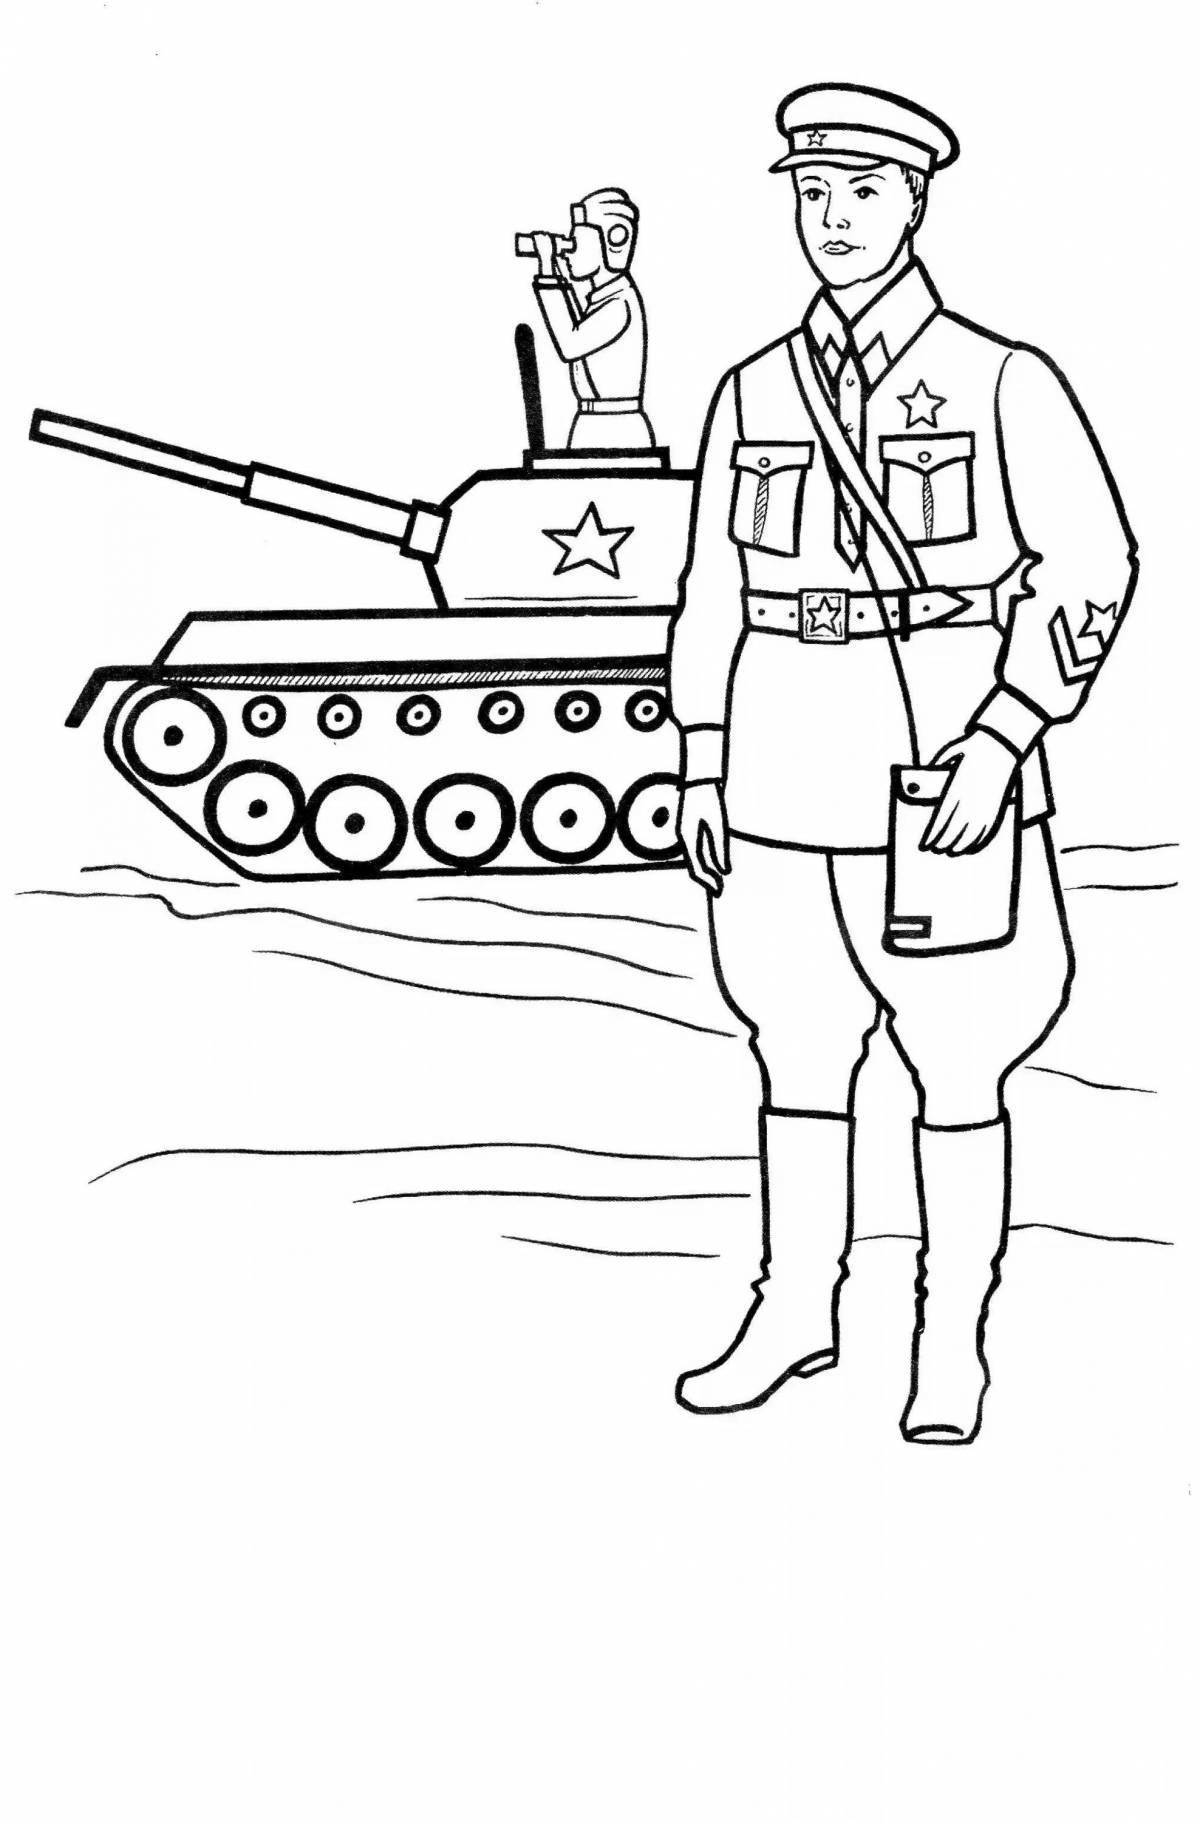 Coloring page brilliant defender of the fatherland